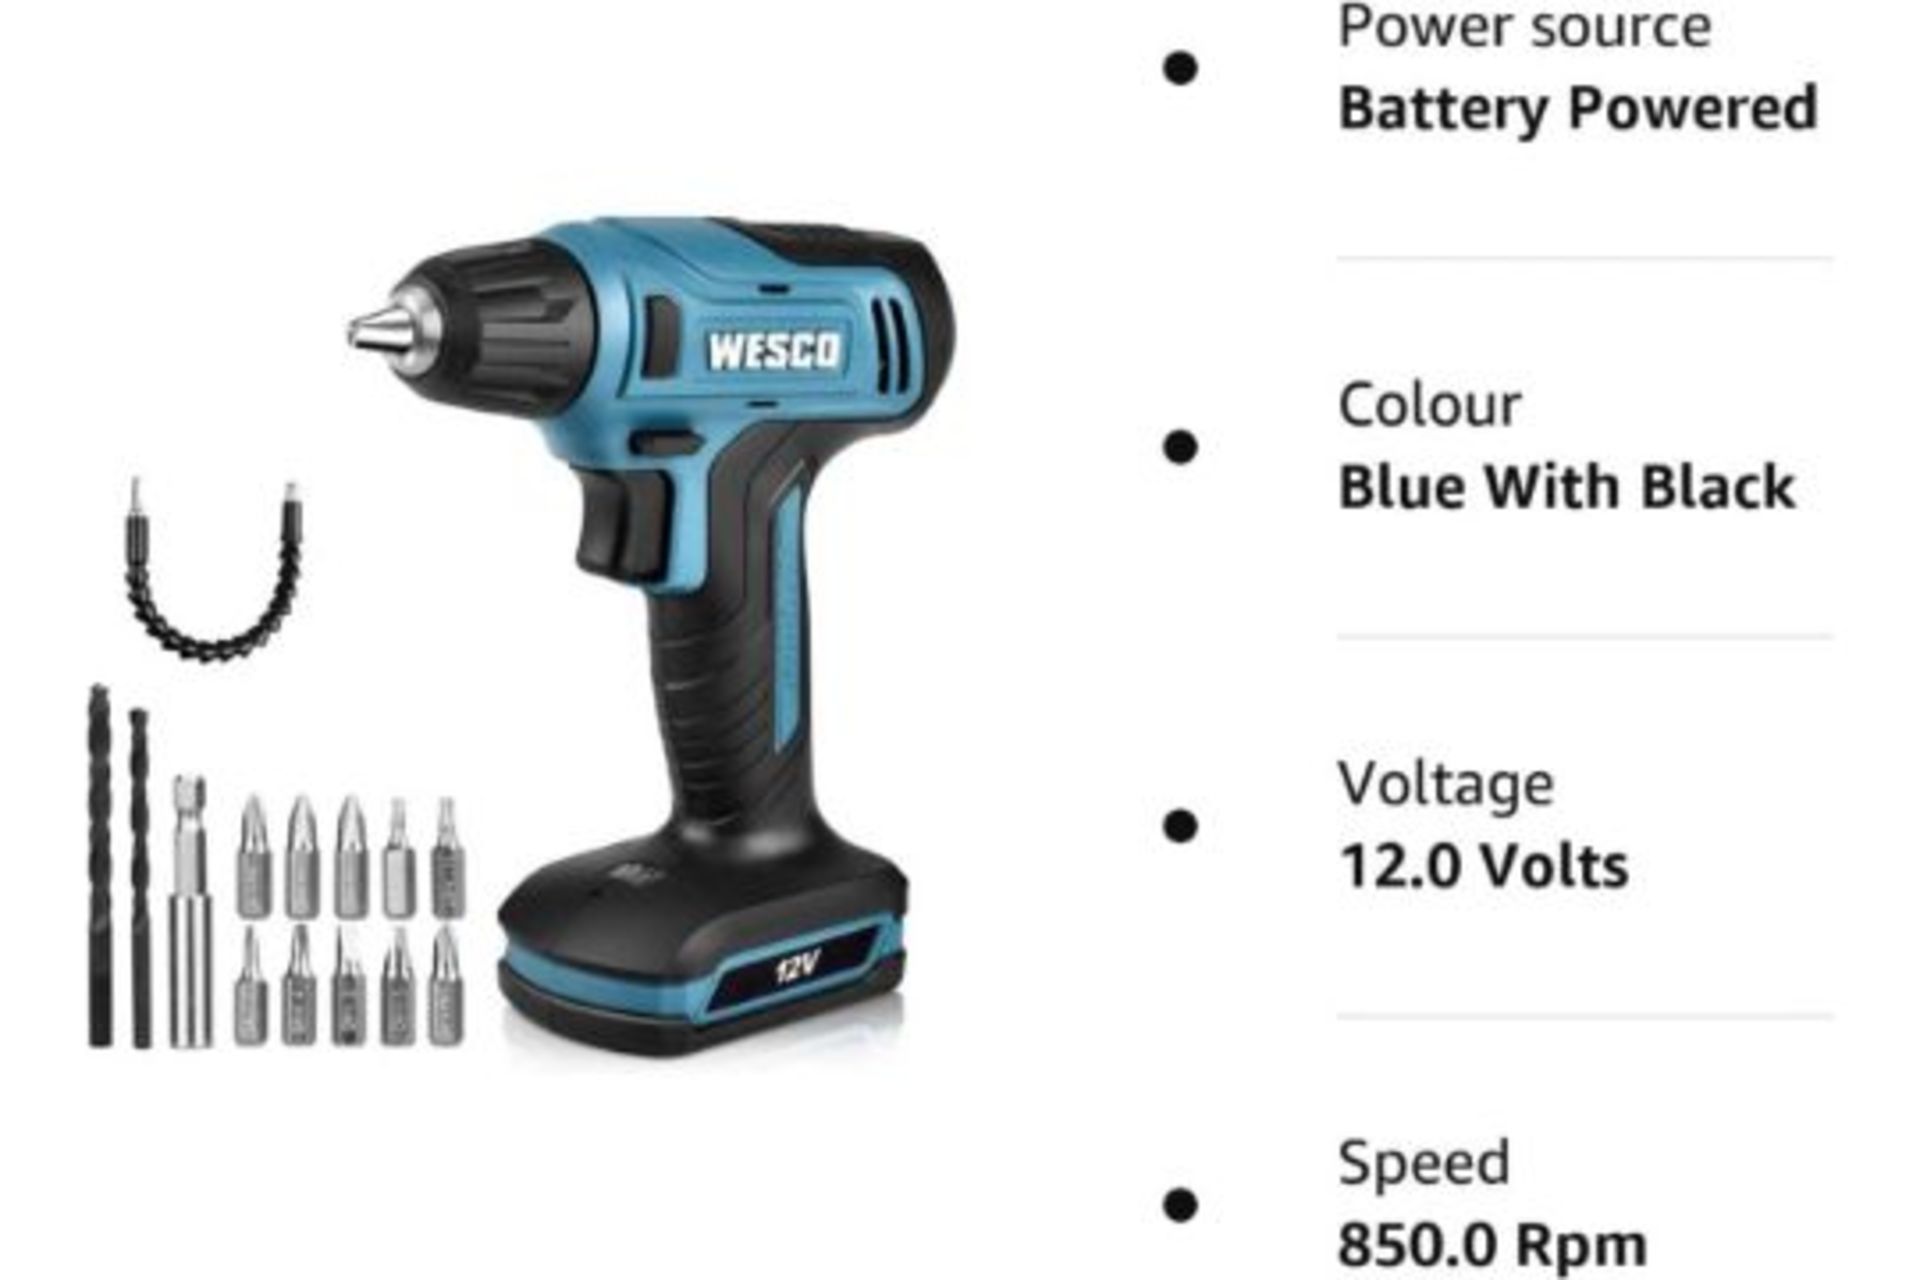 2 x New Boxed WESCO Cordless Drill and Screwdriver Set, 12V Electric Screwdriver, 12 Torque Electric - Image 3 of 3